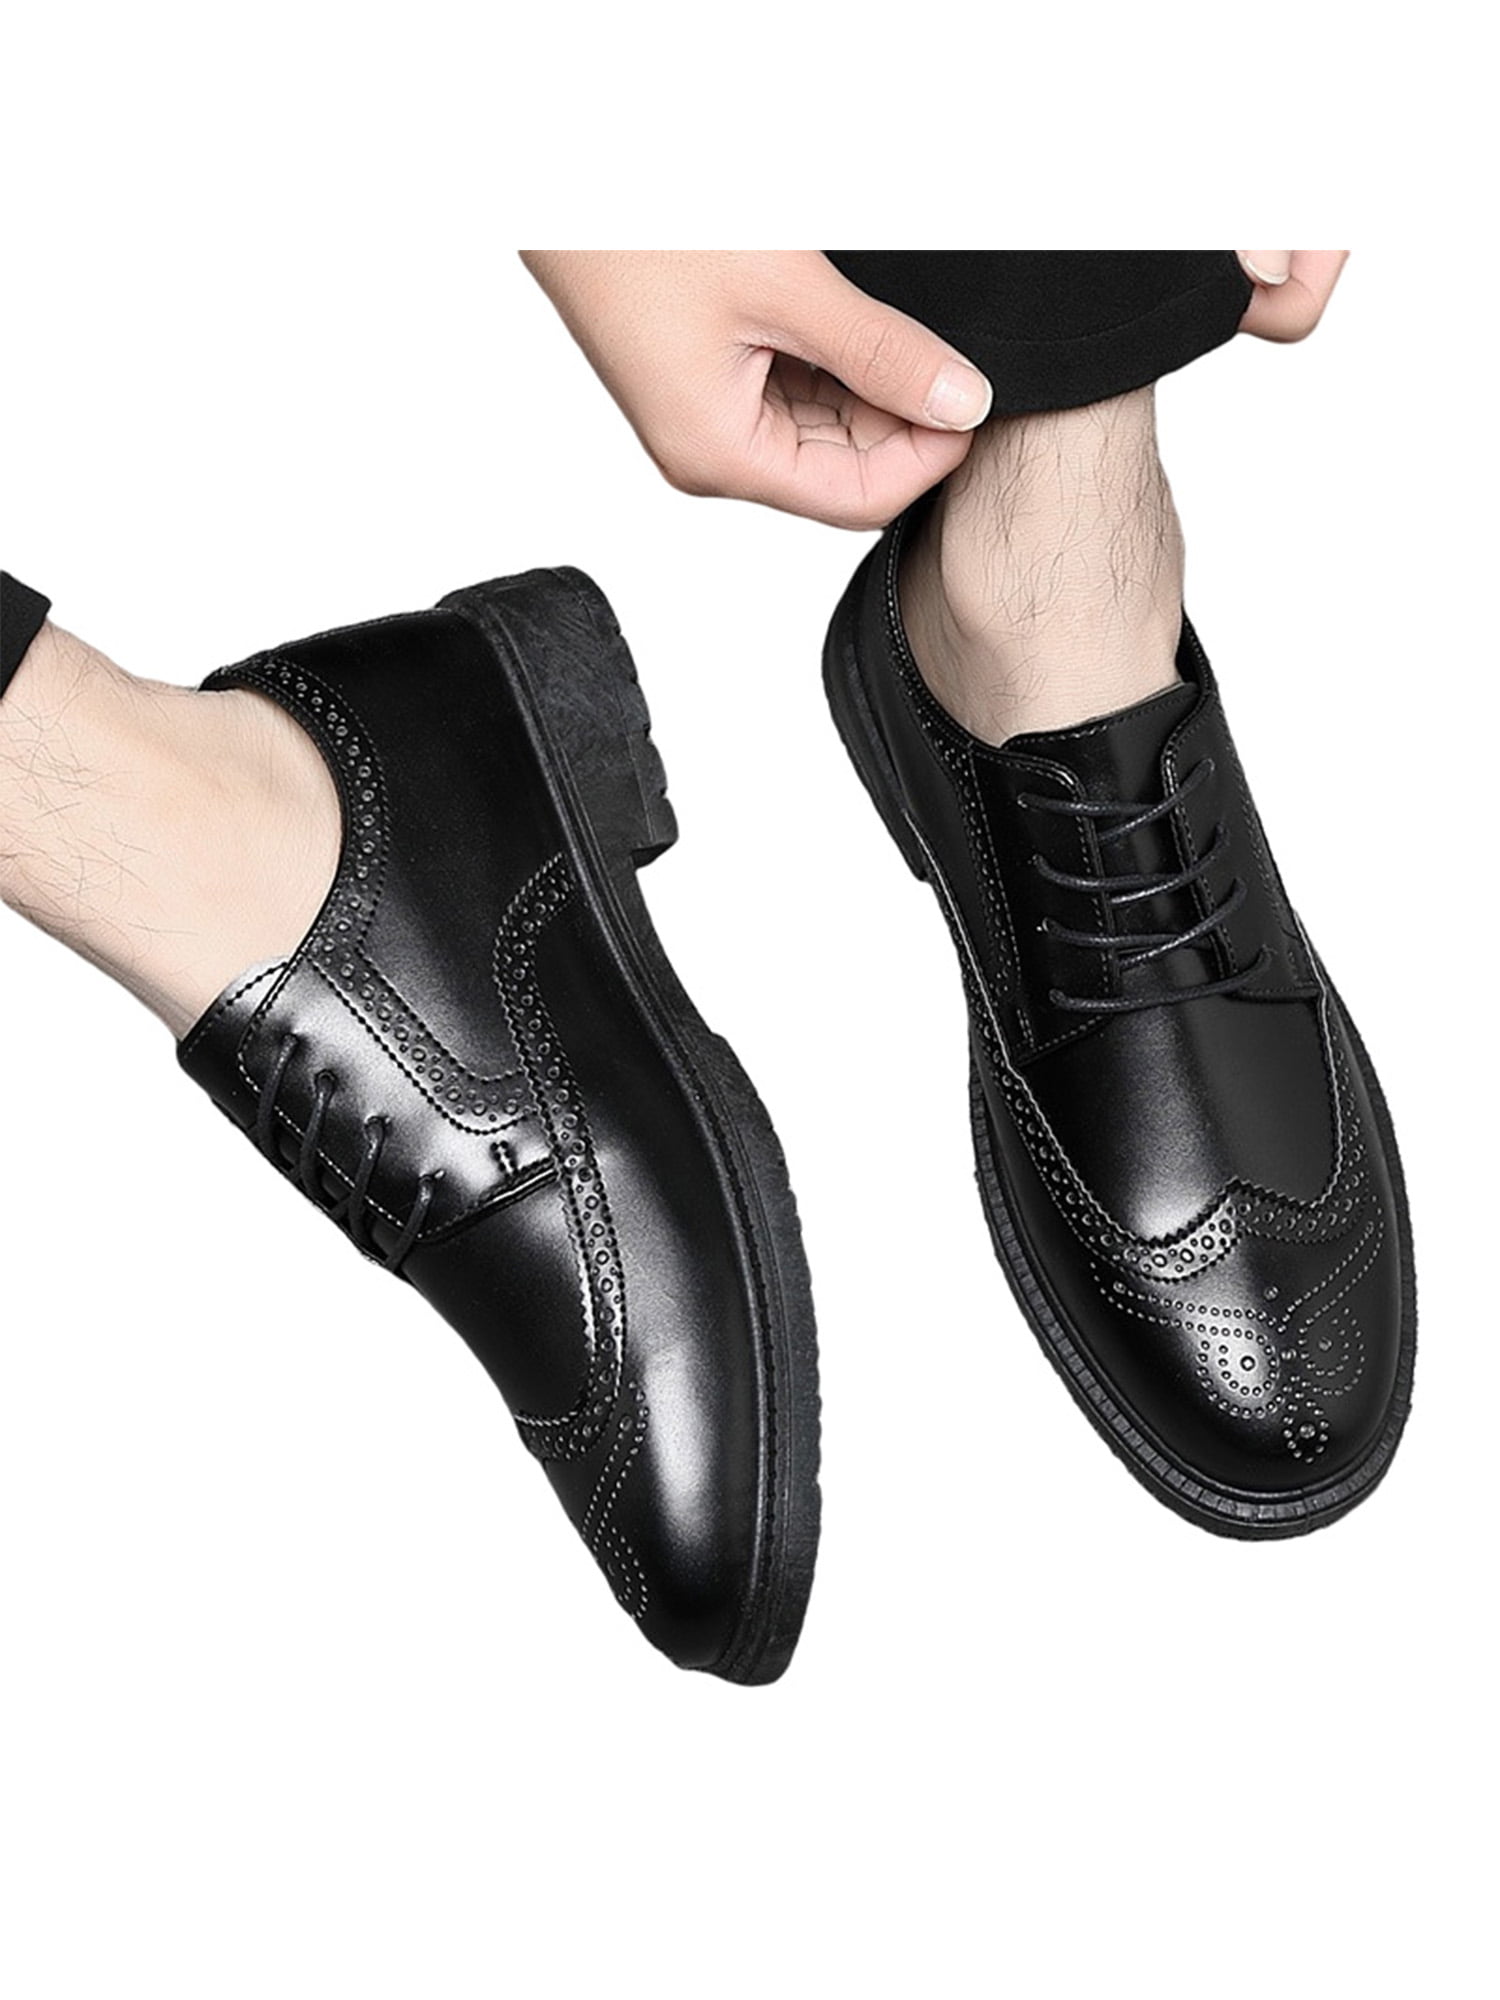 Mens Boys Black Slip On Formal Casual Work Office Stitched Wedding Shoes Size